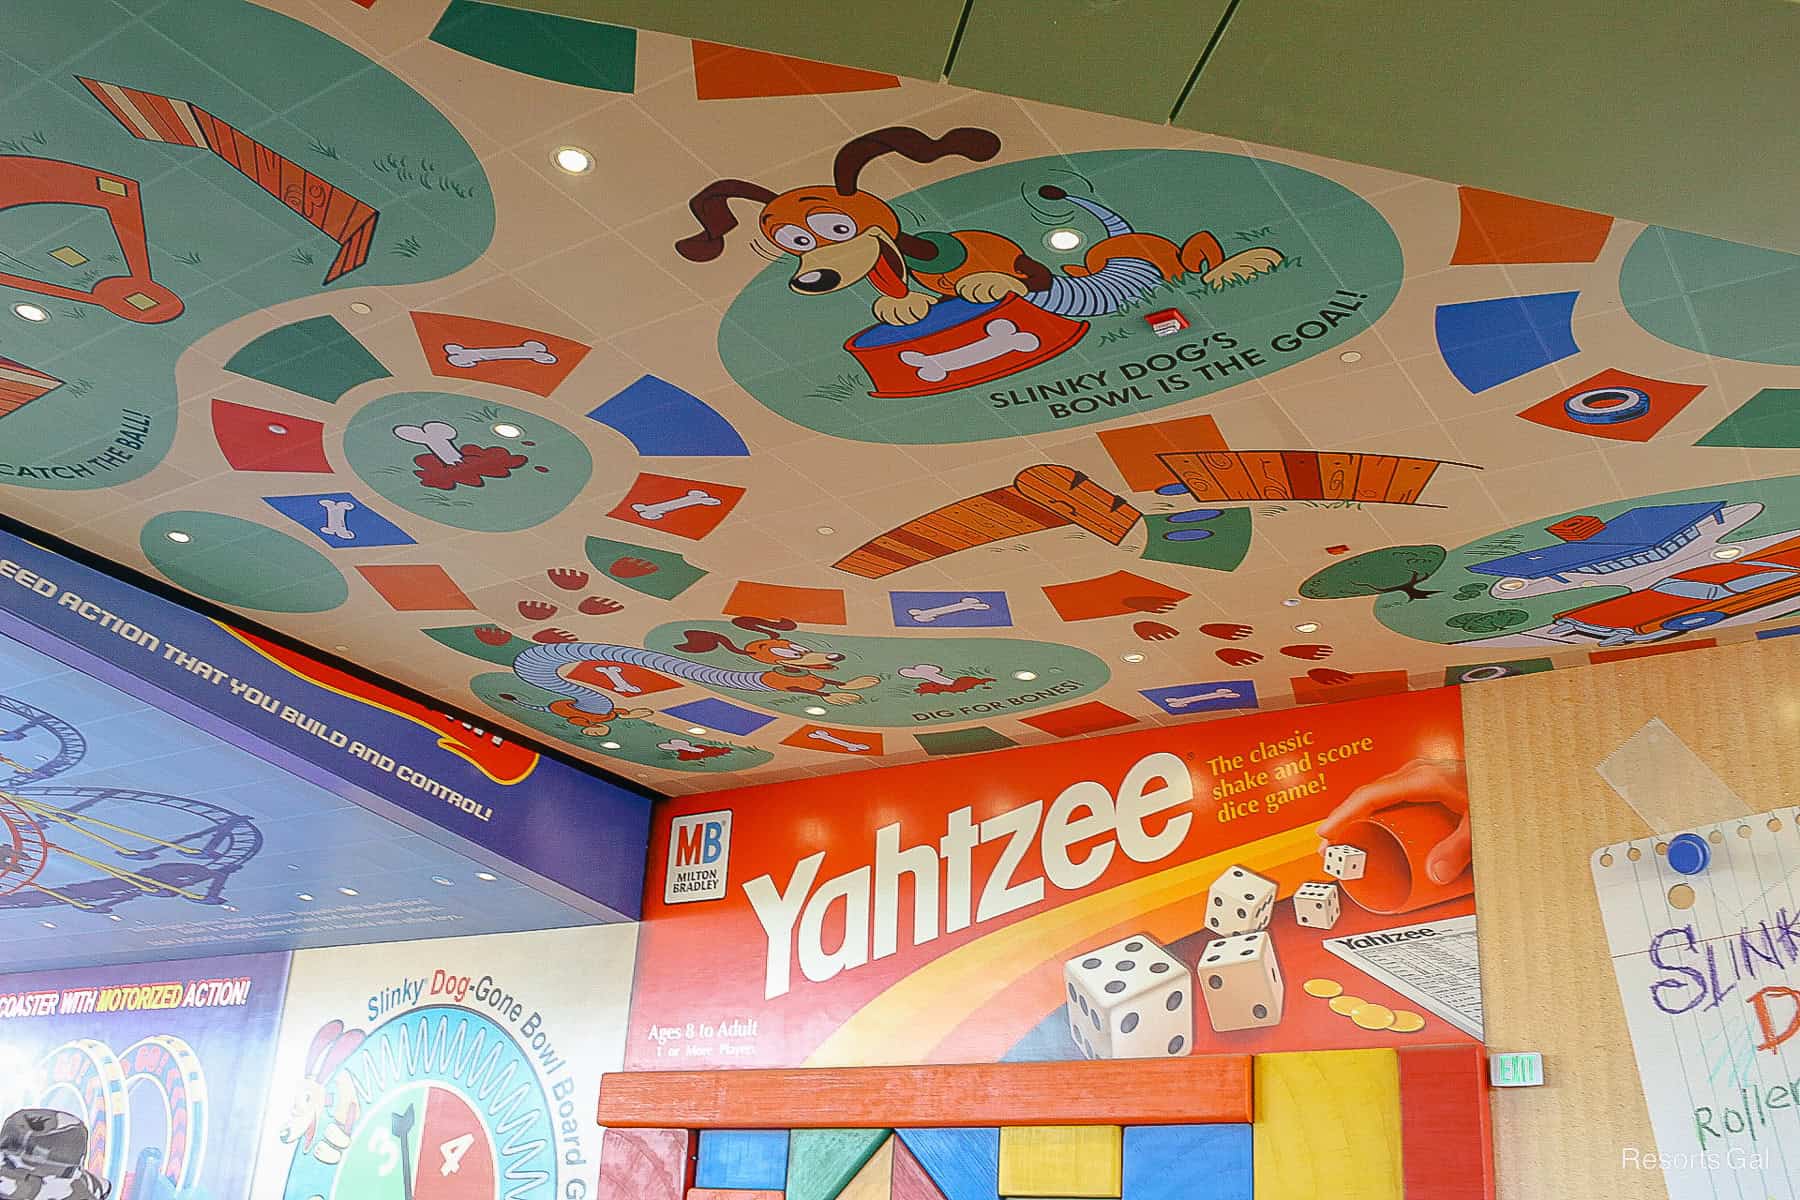 the decorative queue elements overhead in Slinky Dog Dash 